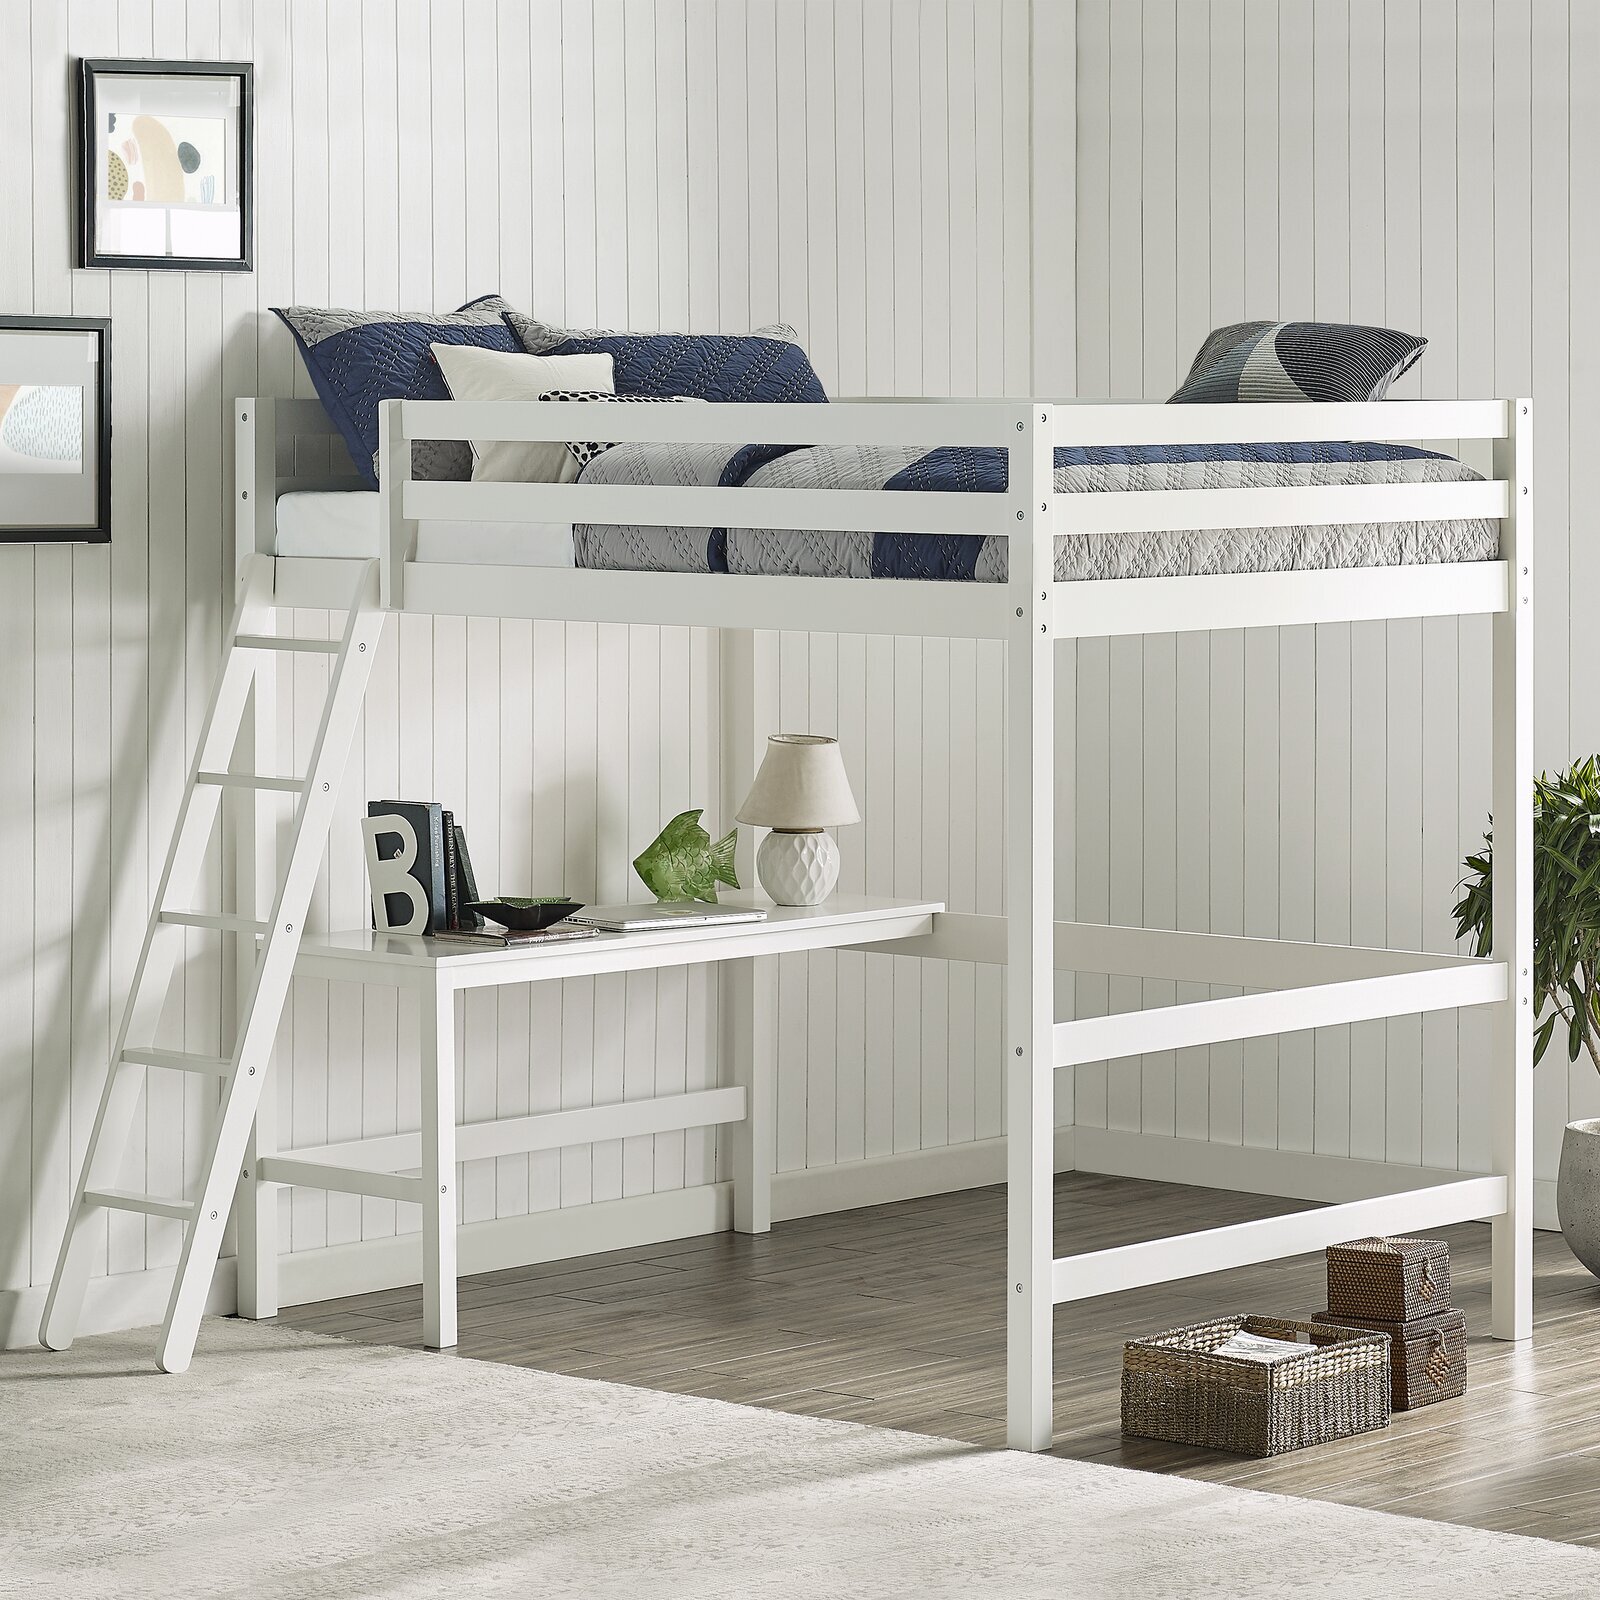 White double bed with desk underneath to make smaller bedrooms feel airier